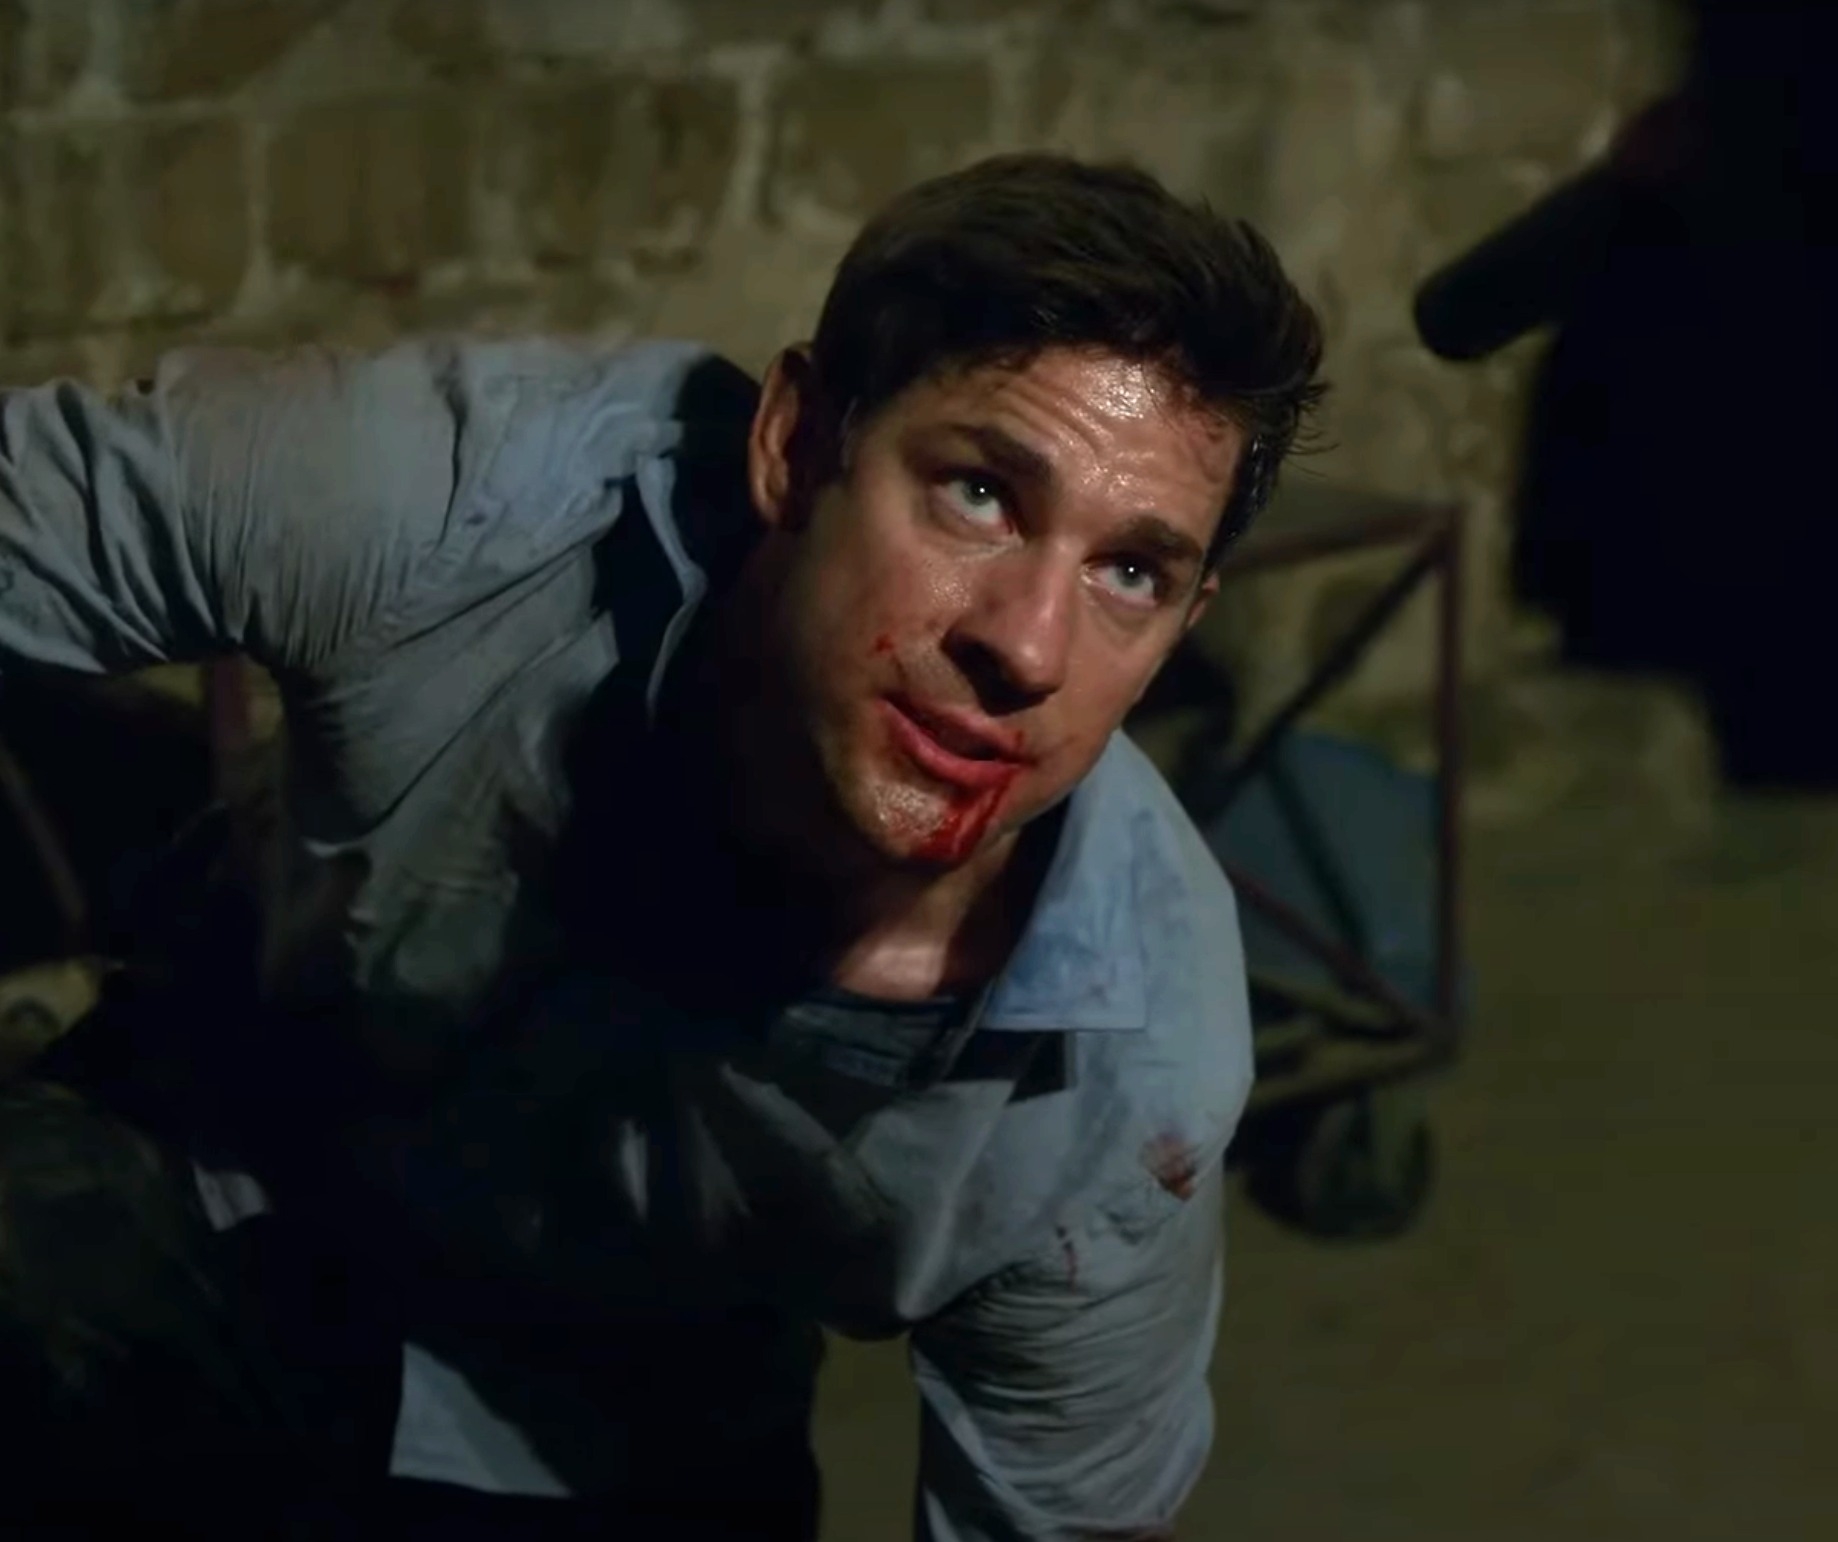 John Krasinski, disheveled and injured, is on his knees with blood on his face, looking up in a tense moment.